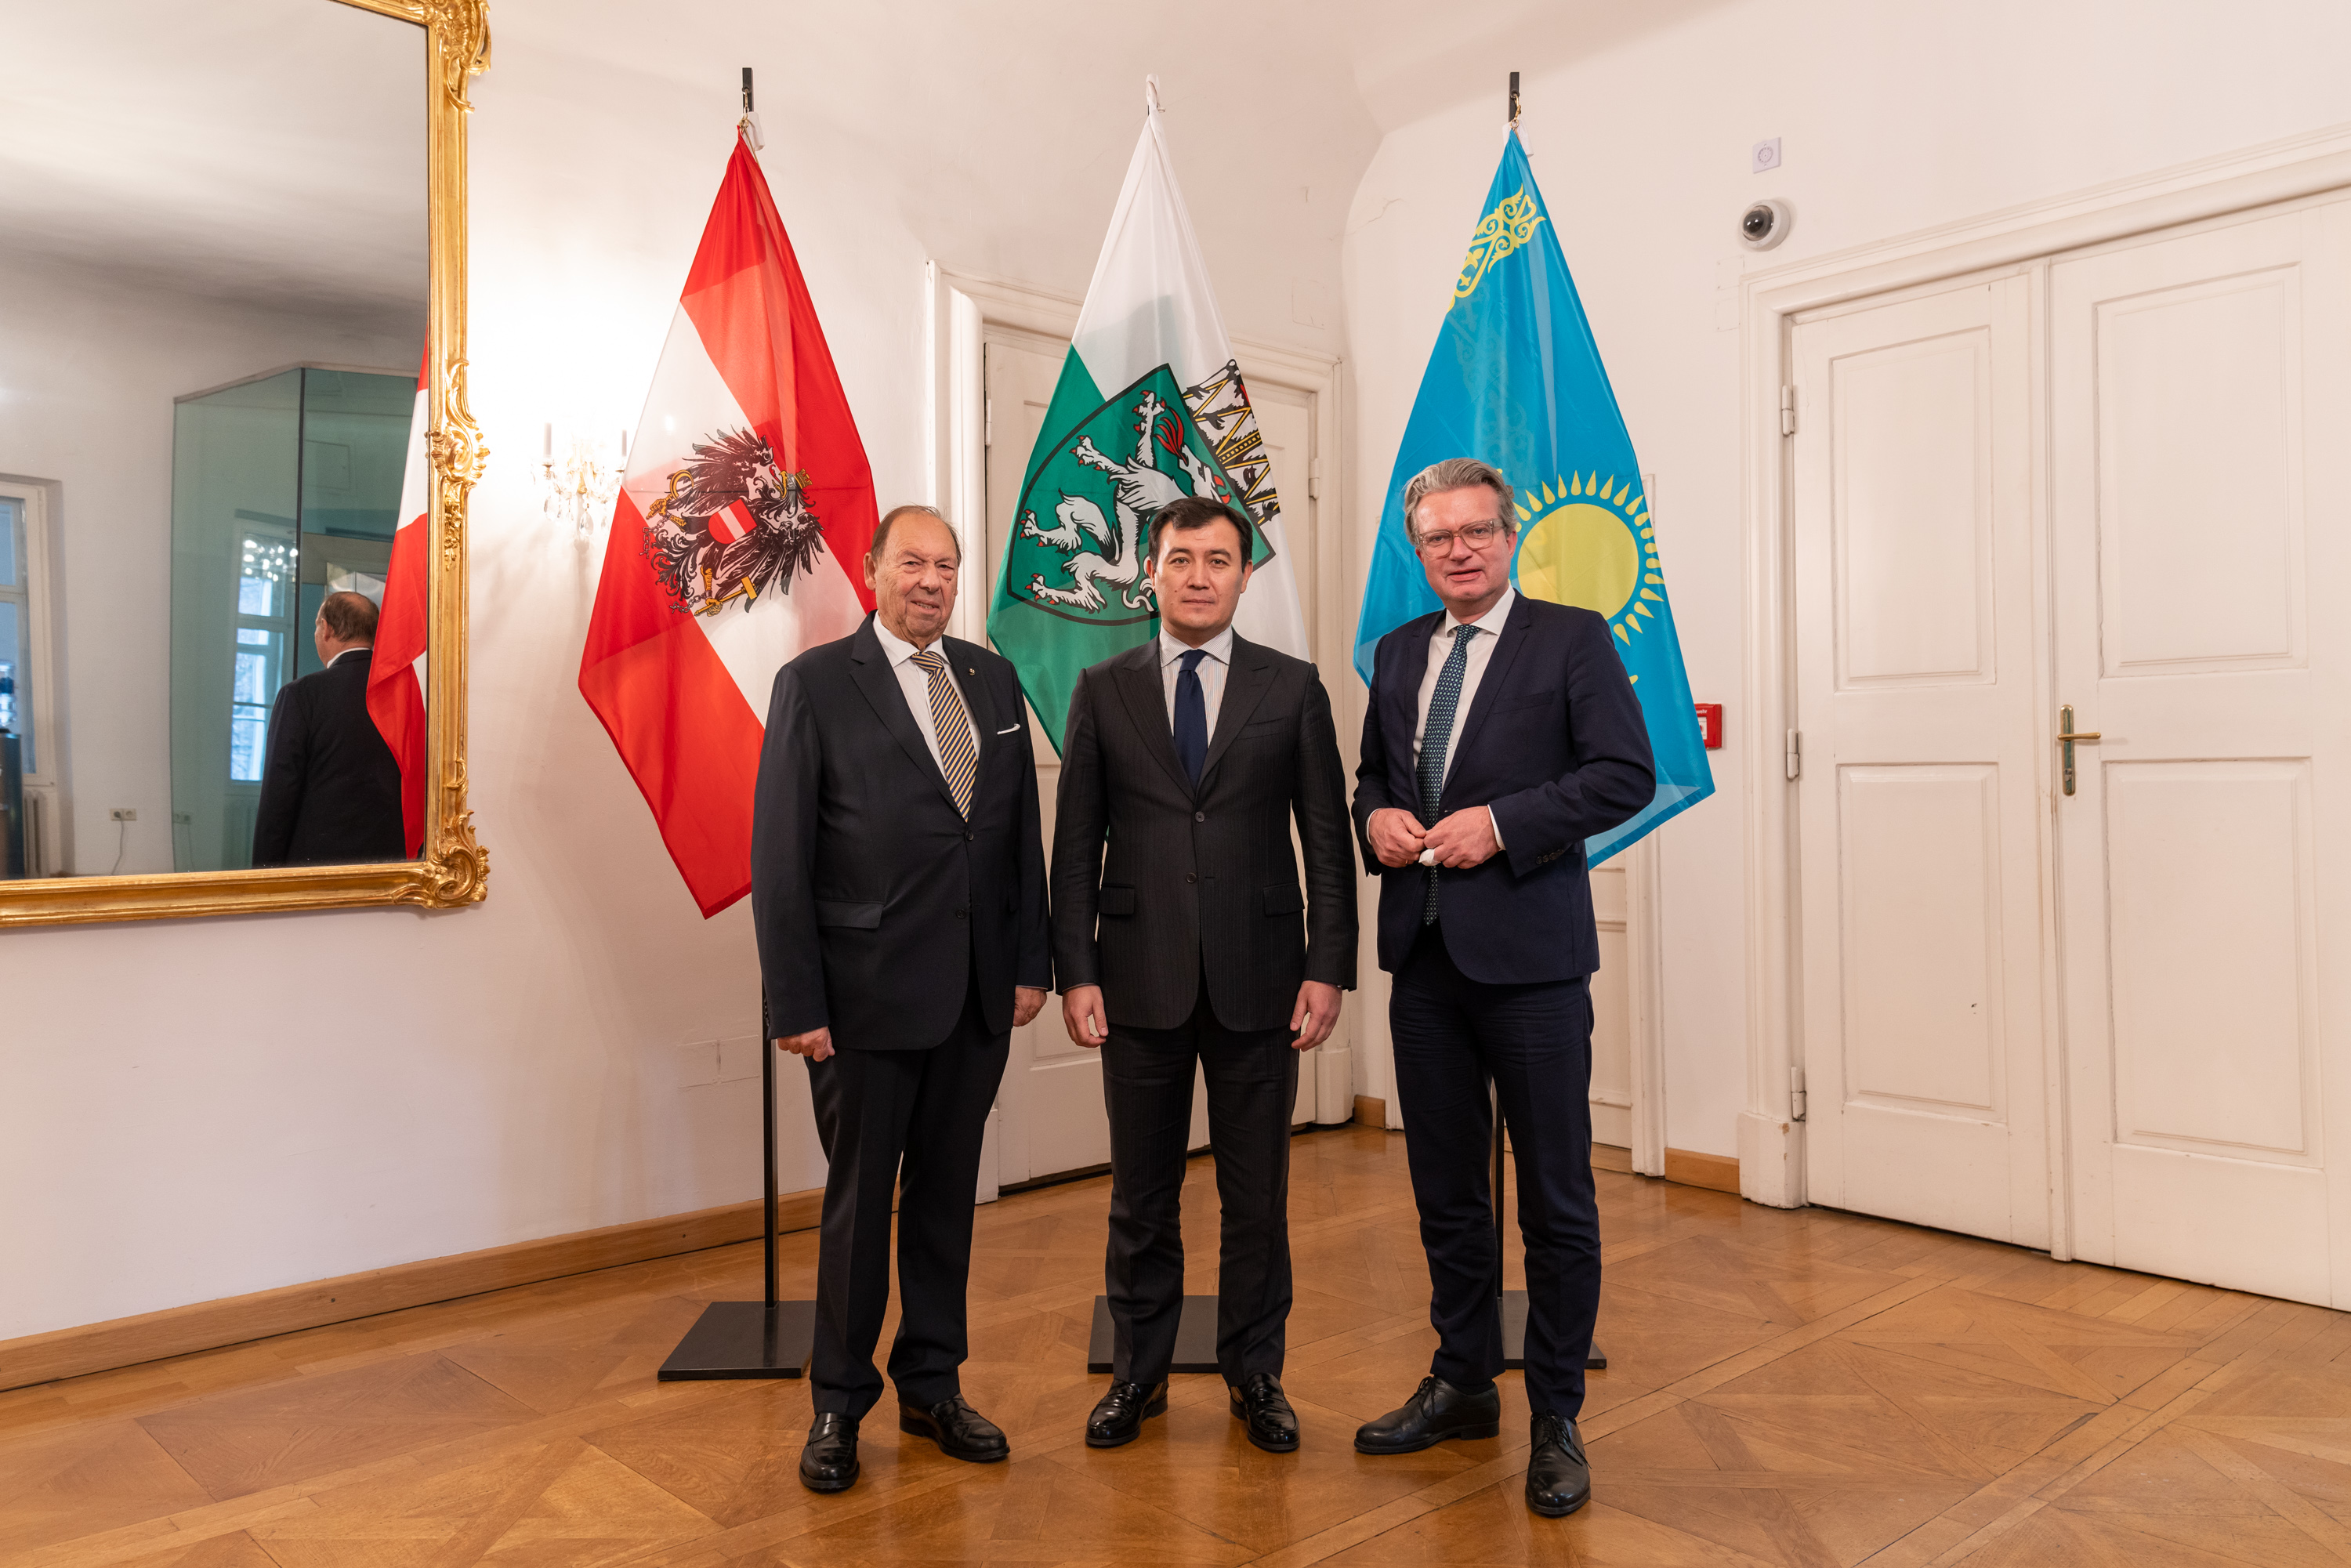 About the visit of the Ambassador of Kazakhstan to Austria, Alibek Bakayev, to the federal state of Styria